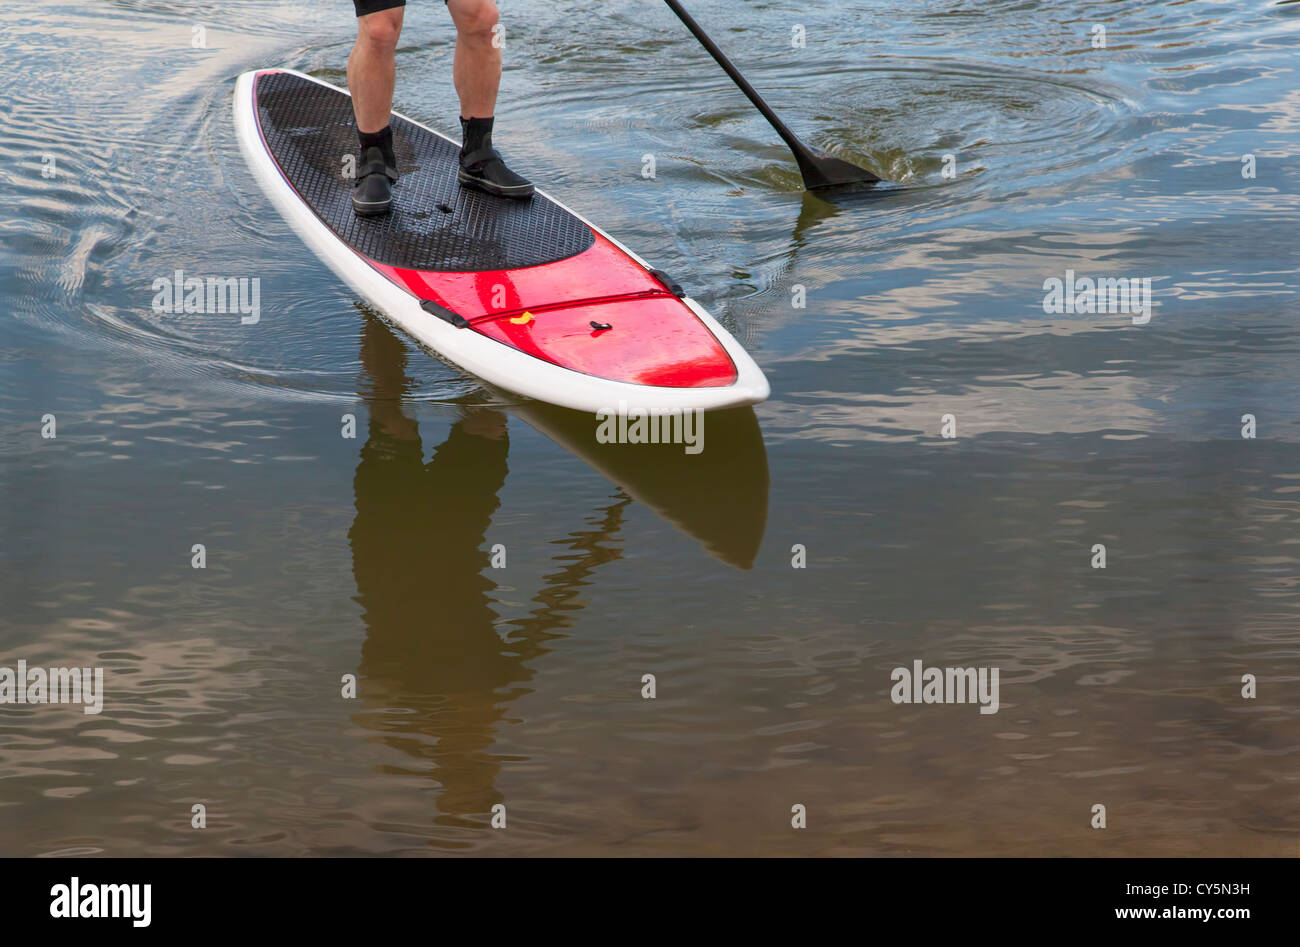 paddling stand up paddleboard on a lake - feet and legs of male paddler Stock Photo